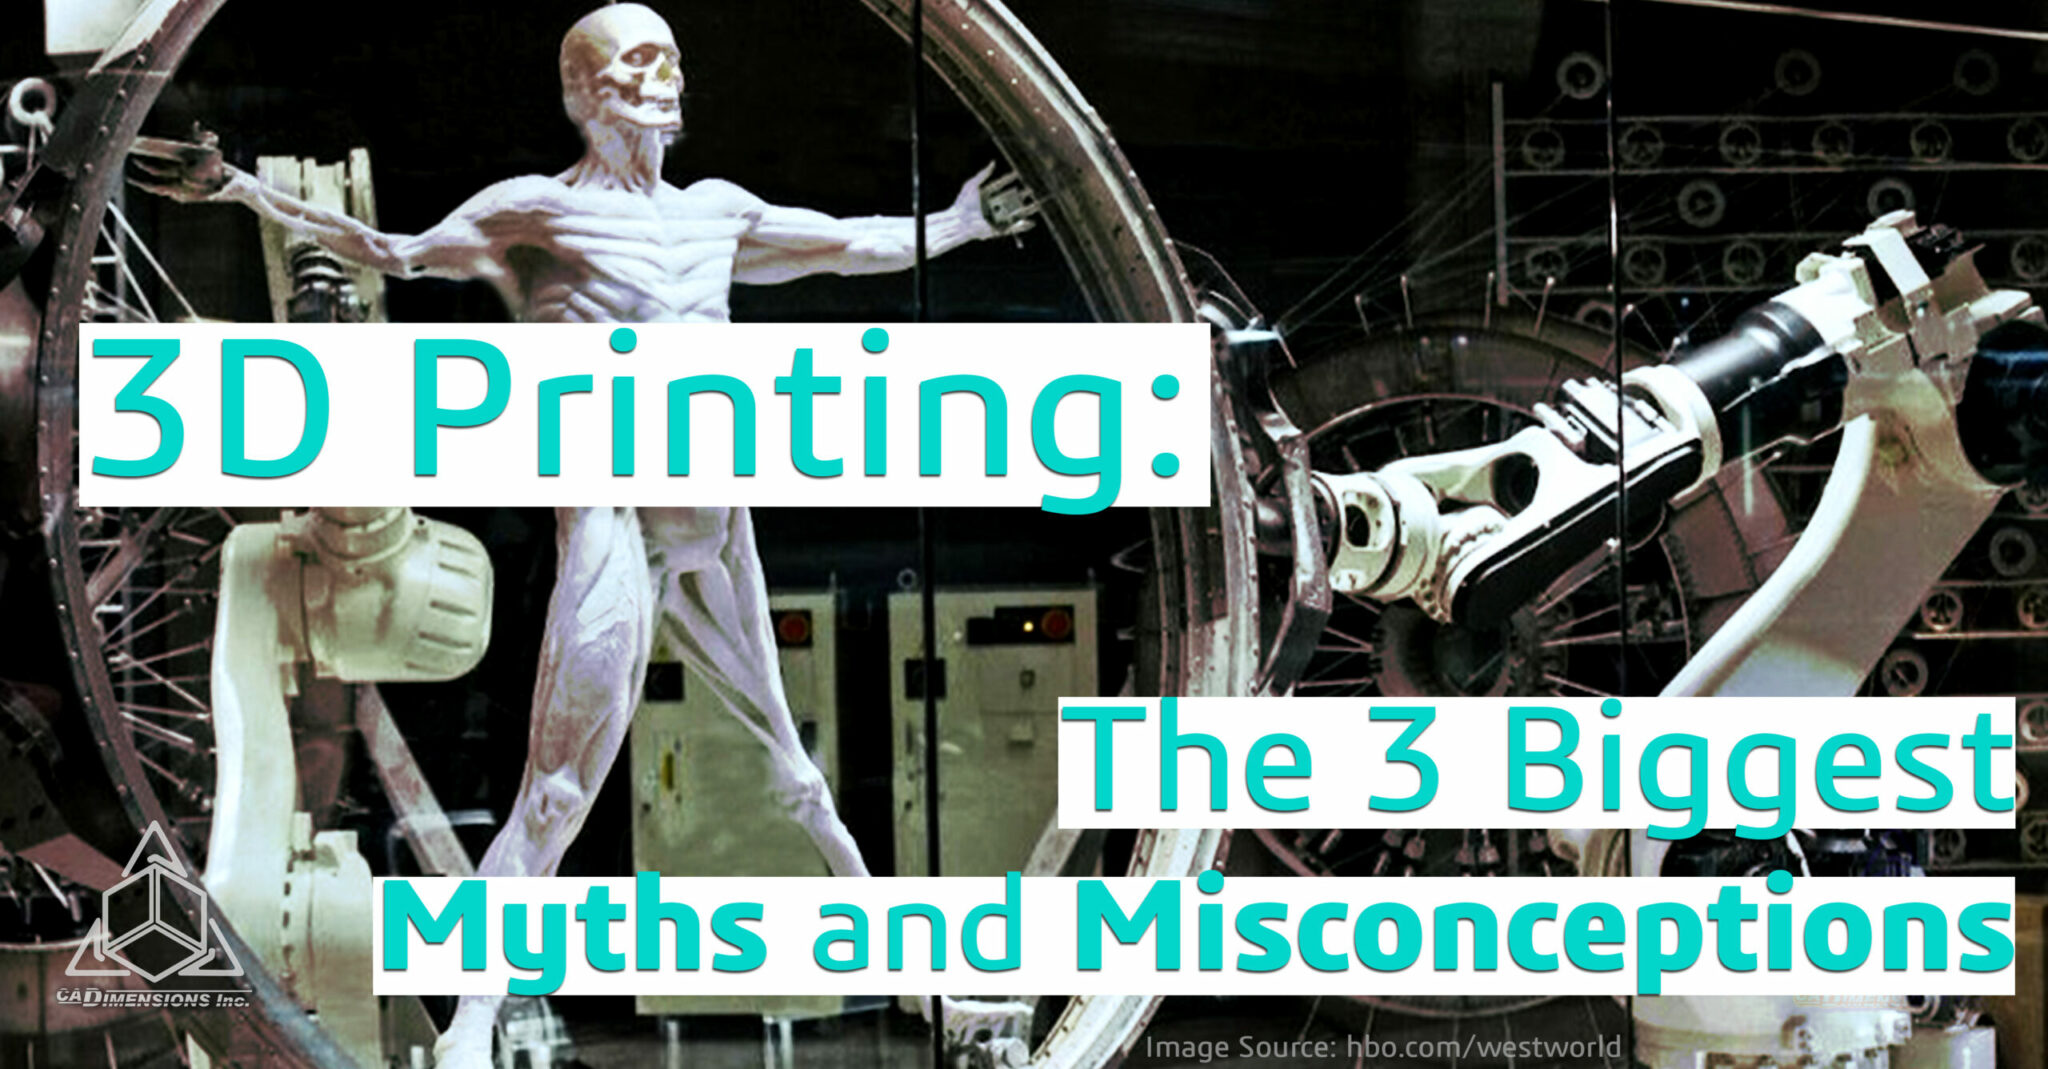 3D Printing The 3 Biggest Myths and Misconceptions